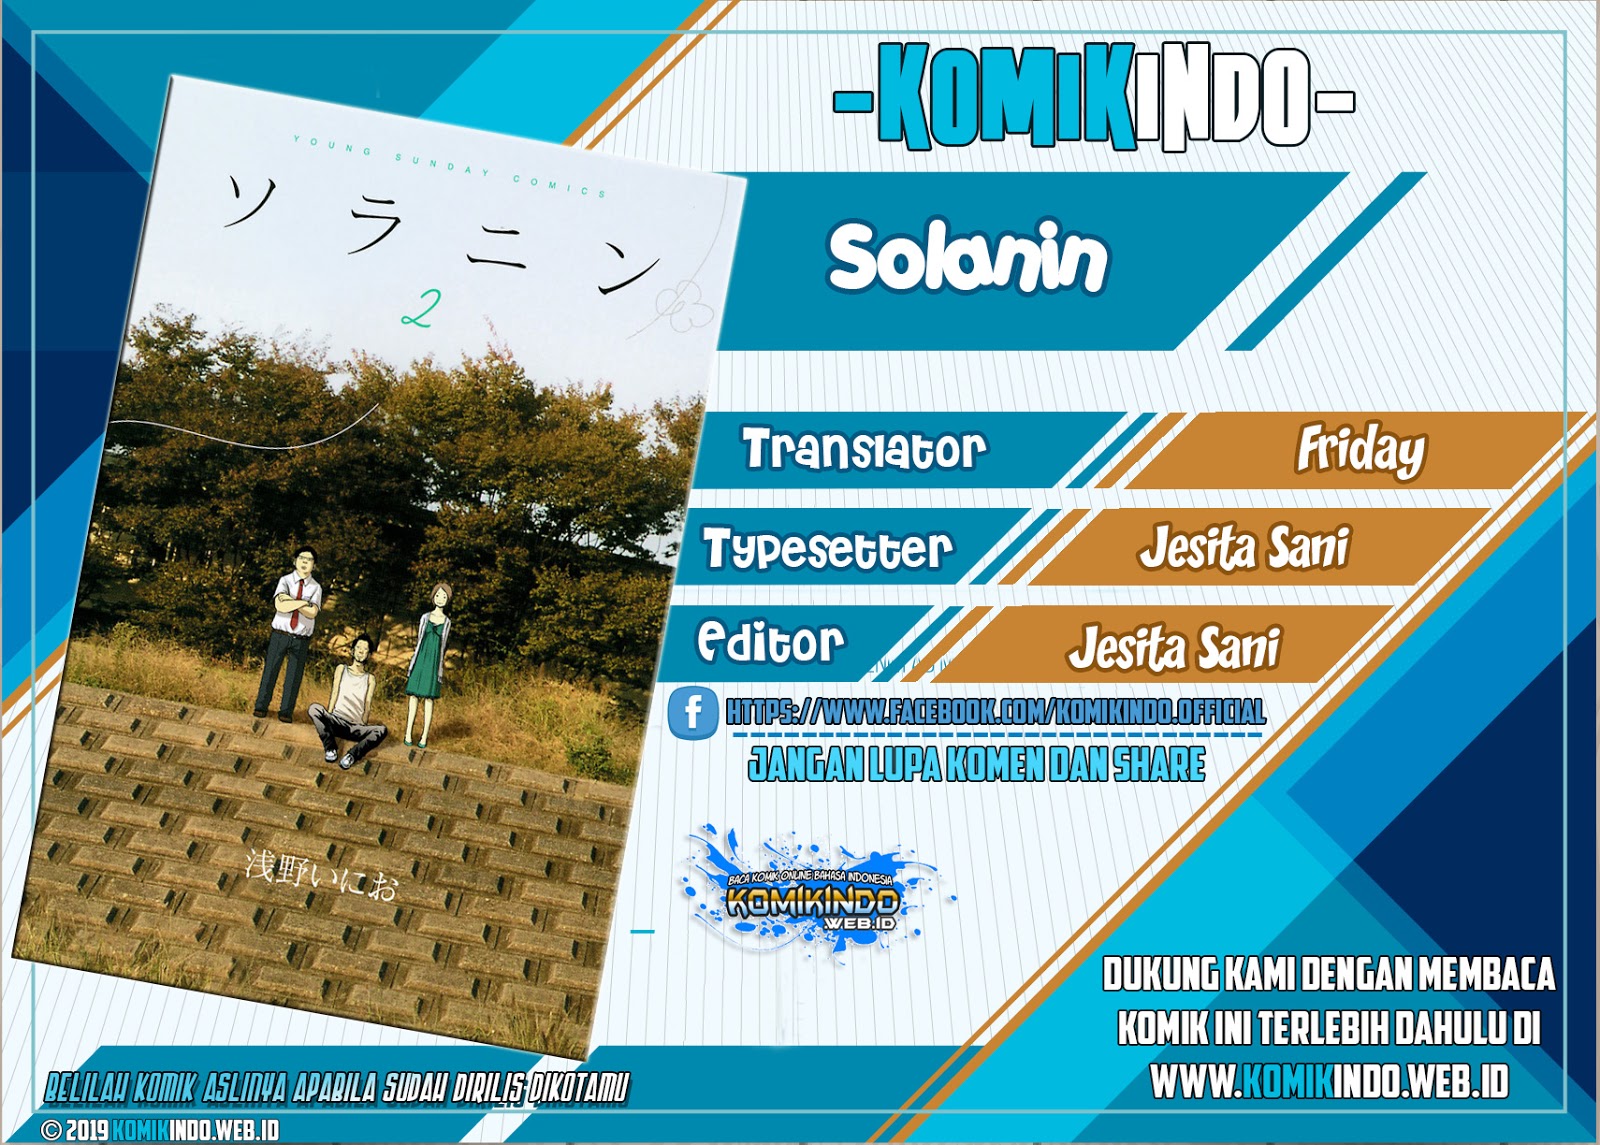 Solanin Chapter 02